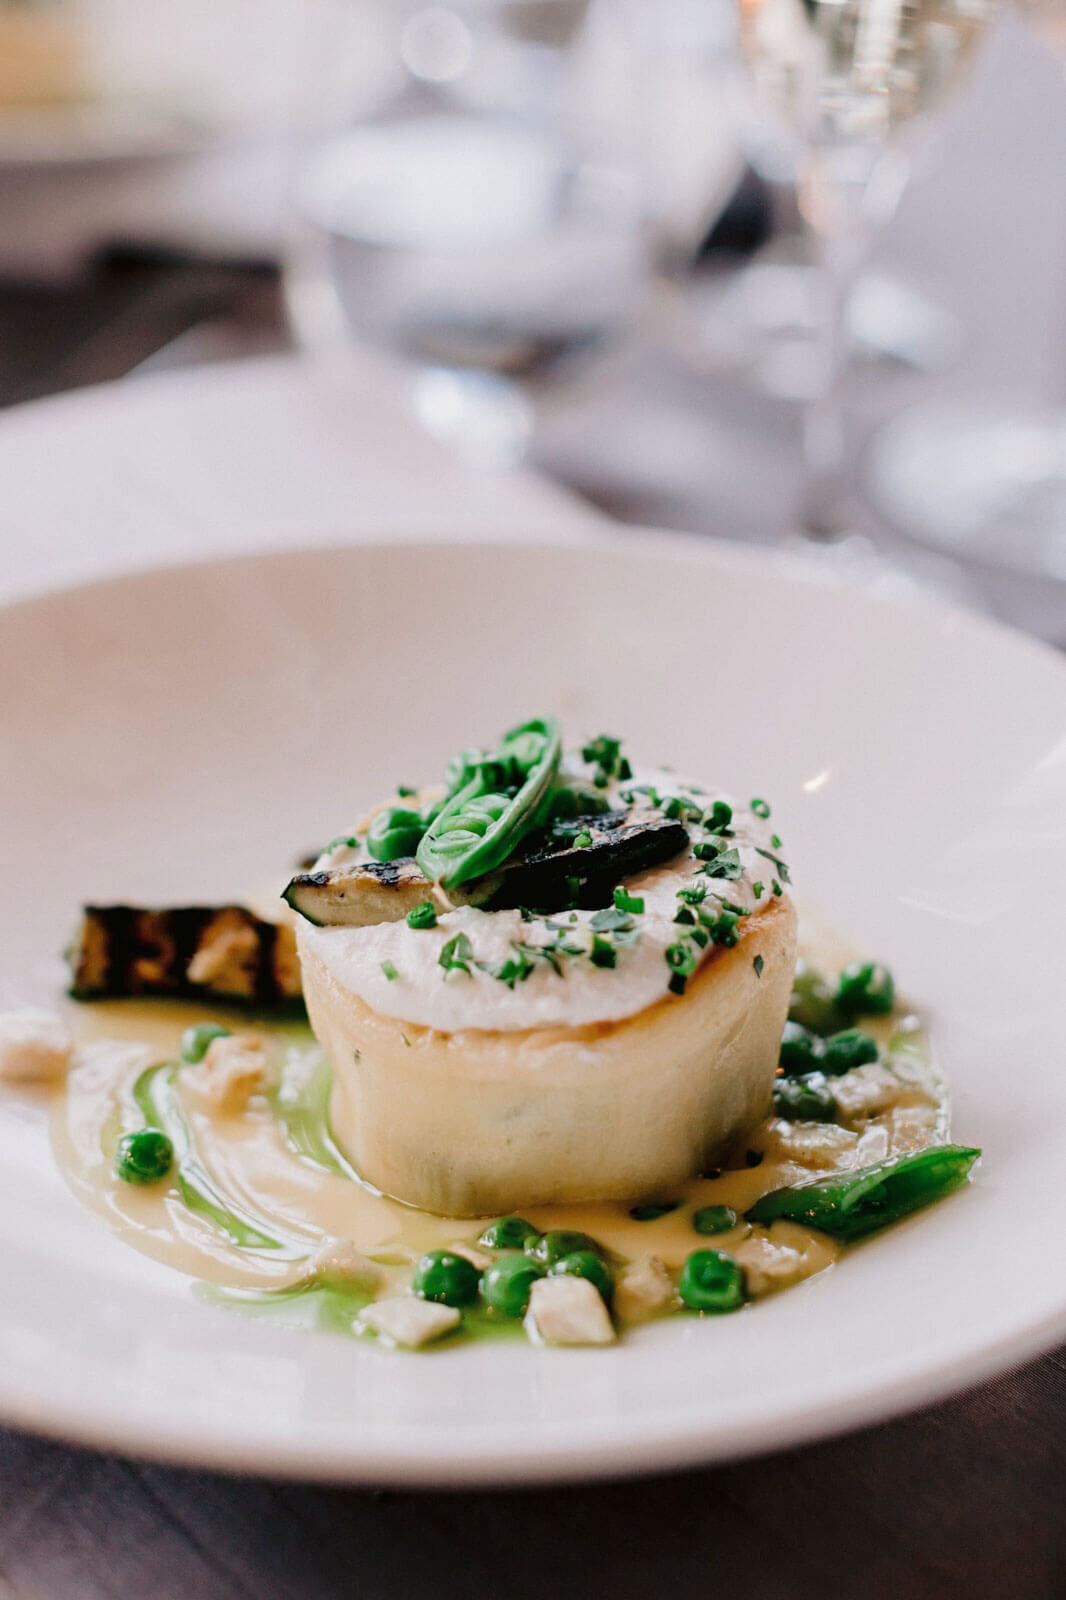 Gourmet scallop on a plate in the wedding reception in The Skylark, New York. Wedding Image by Jenny Fu Studio